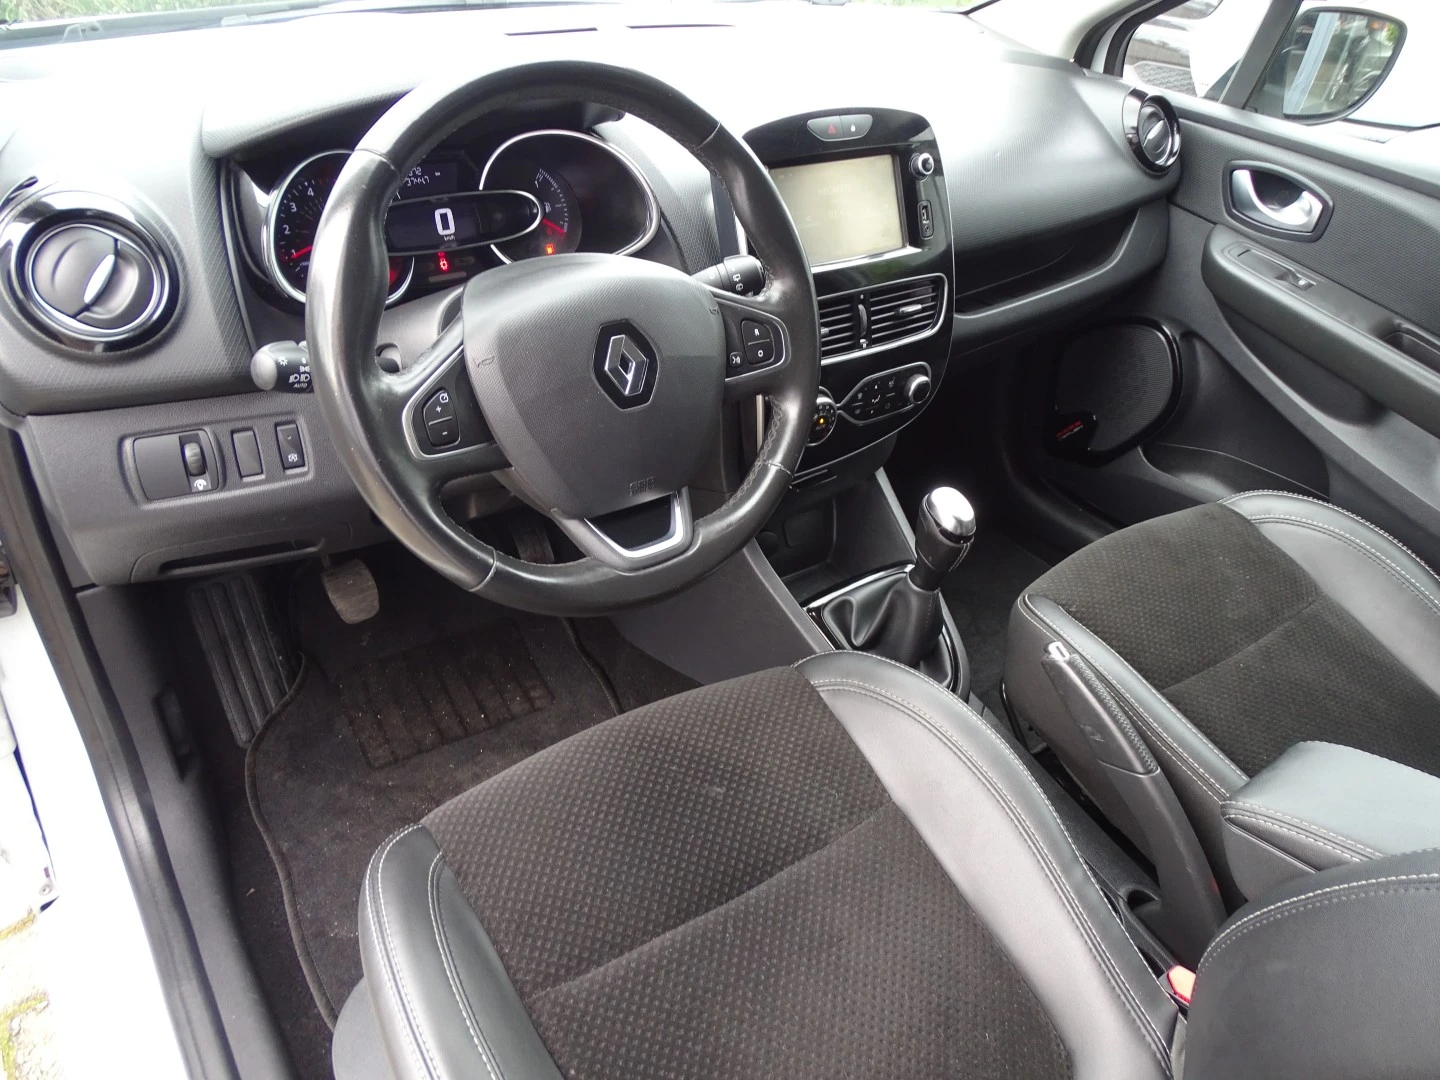 Renault Clio 1.5 dCi Luxe